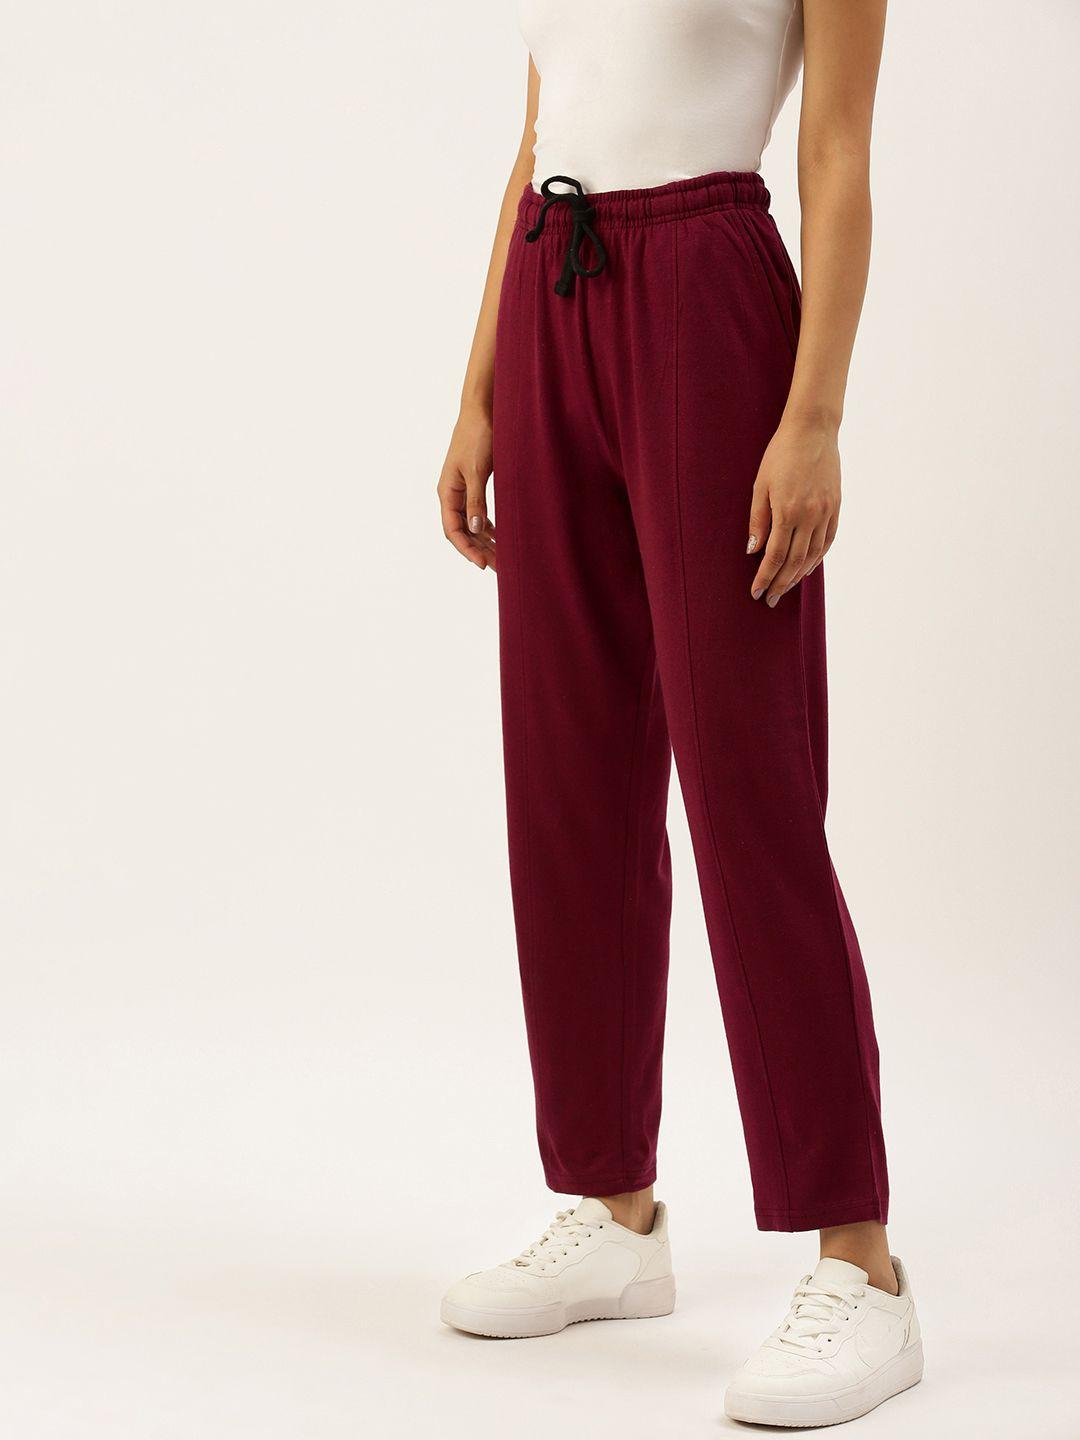 arise-women-maroon-solid-track-pant